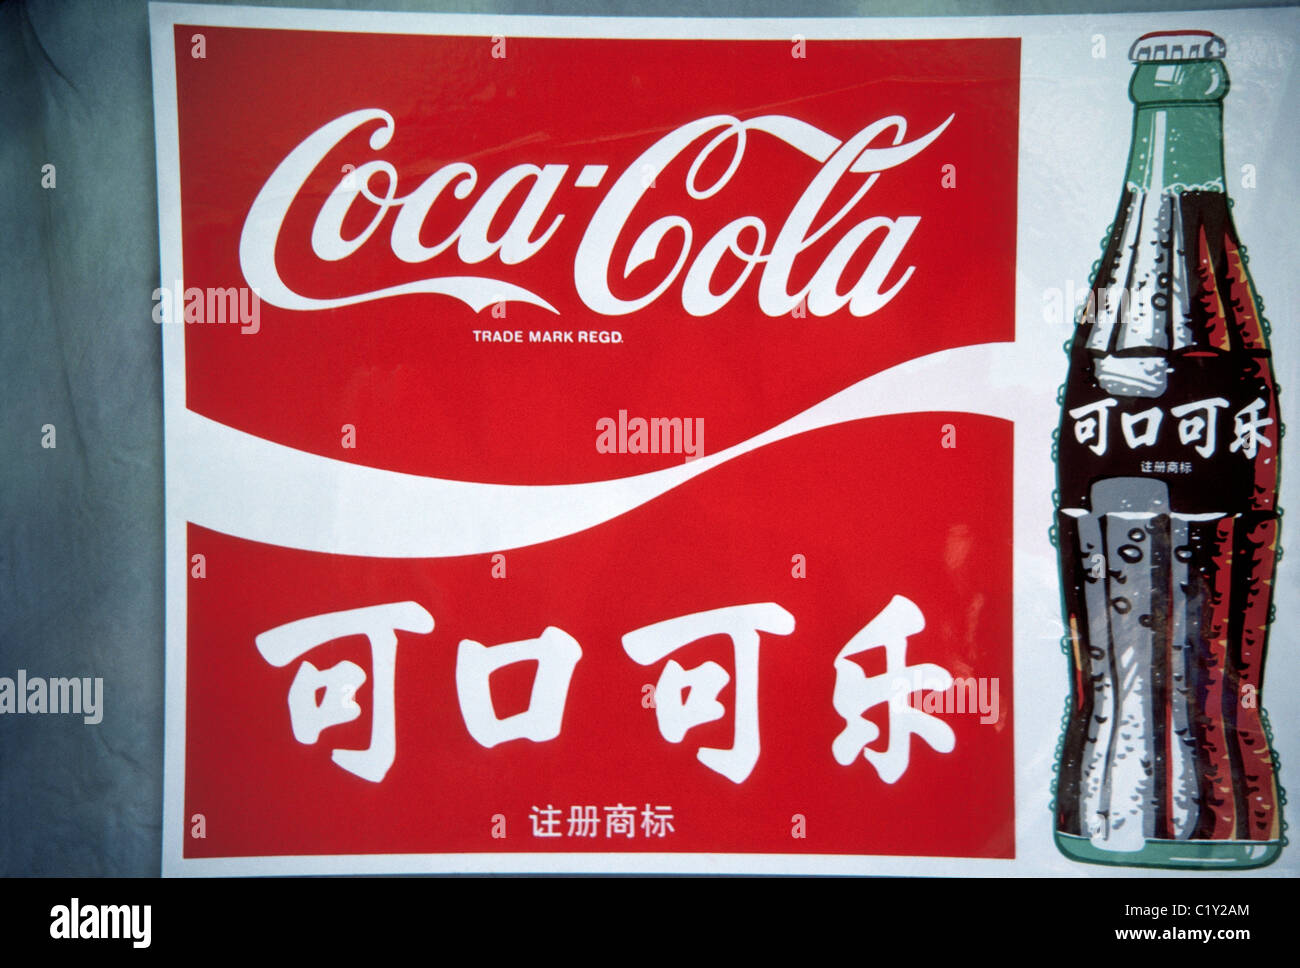 World-renowned Coca-Cola is advertised with its brand name printed in  English letters and Chinese characters on a sign in Beijing, China (PRC  Stock Photo - Alamy